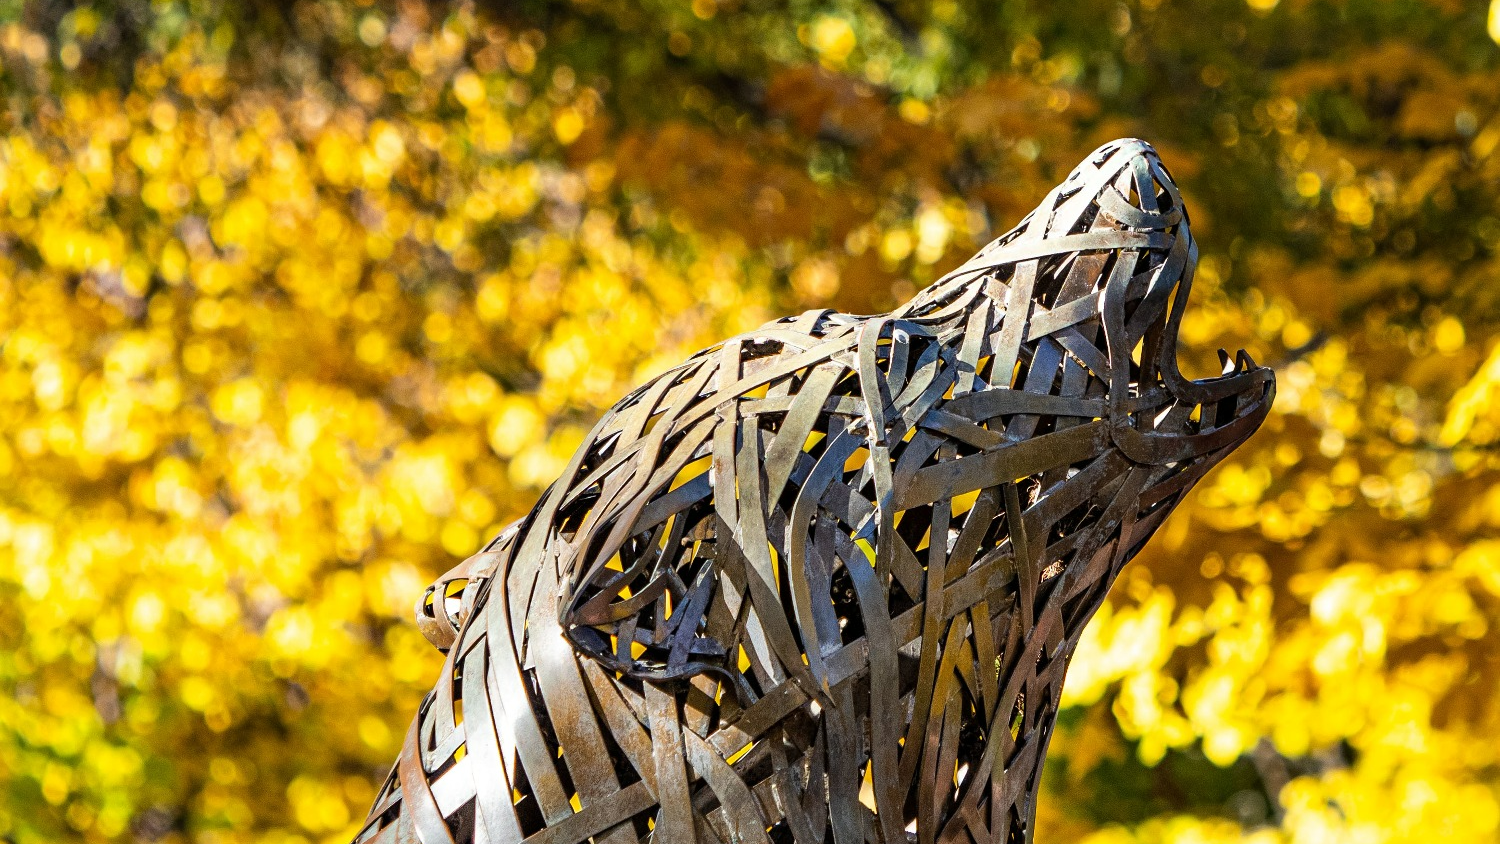 Wolf statue in fall - DIRE Dialog Seminar to highlight LGBT Center of Raleigh - College of Natural Resources News NC State University